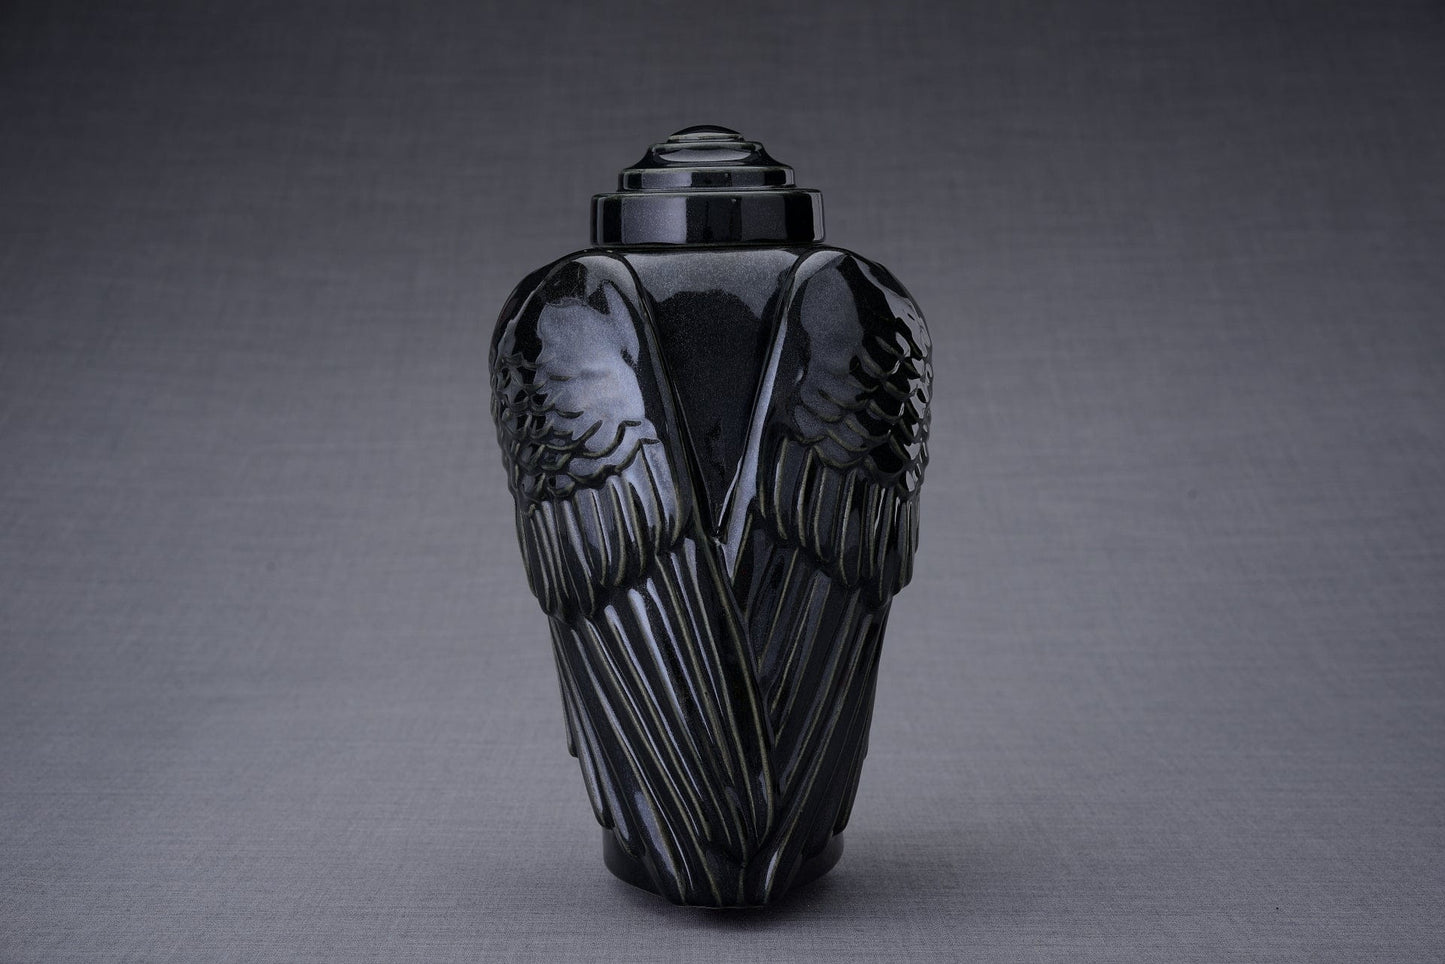 Pulvis Art Urns Adult Size Urn Handmade Cremation Urn for Ashes "Wings" - Large | Black Gloss | Ceramic